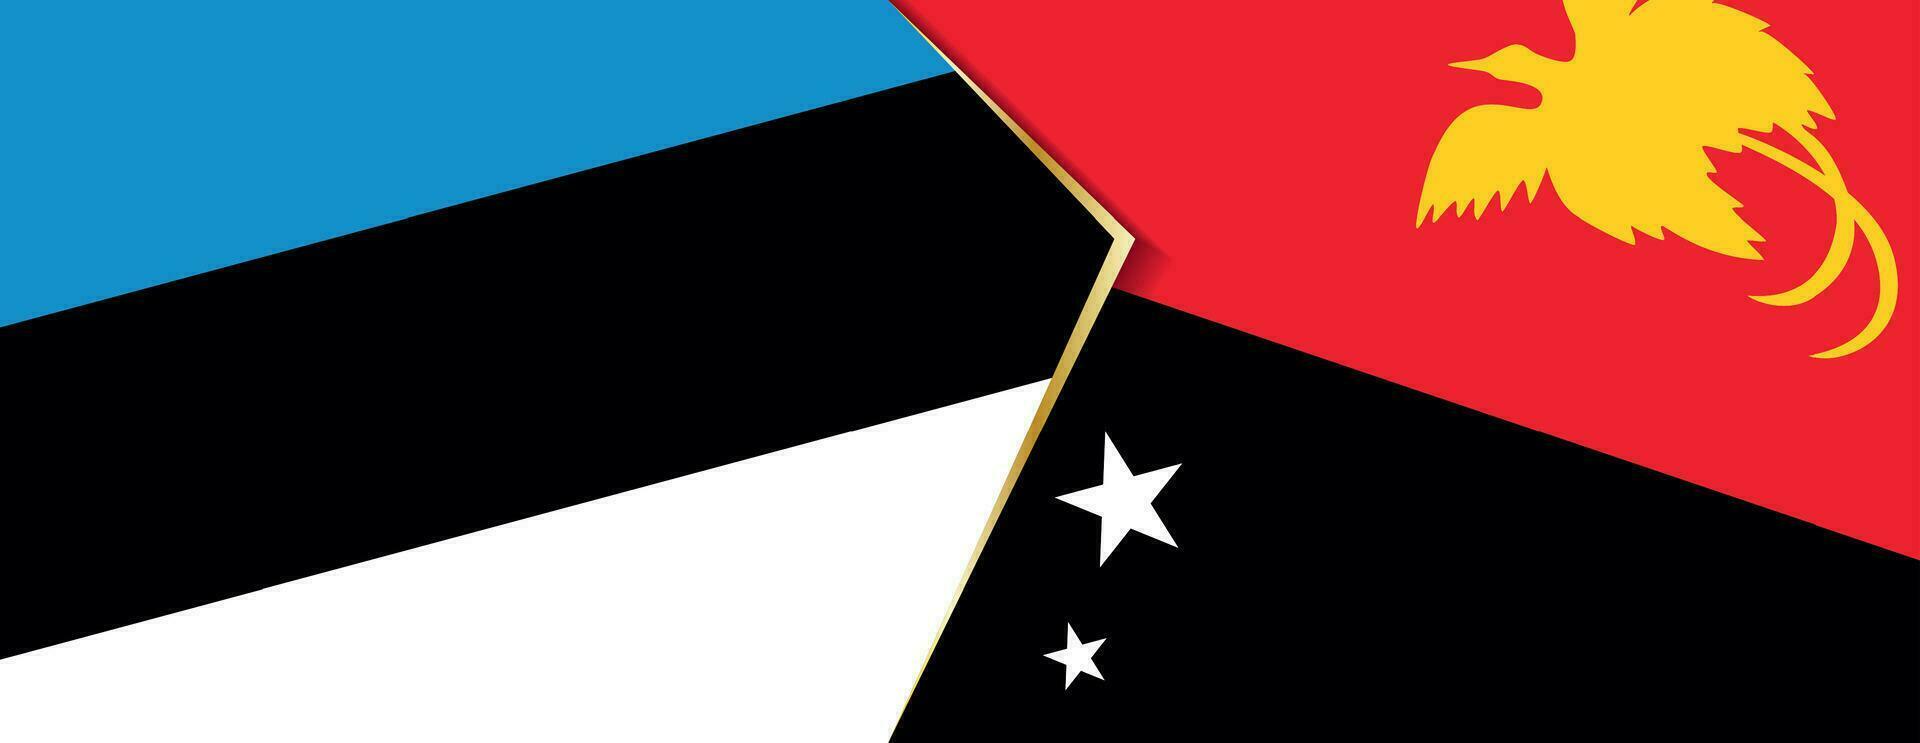 Estonia and Papua New Guinea flags, two vector flags.